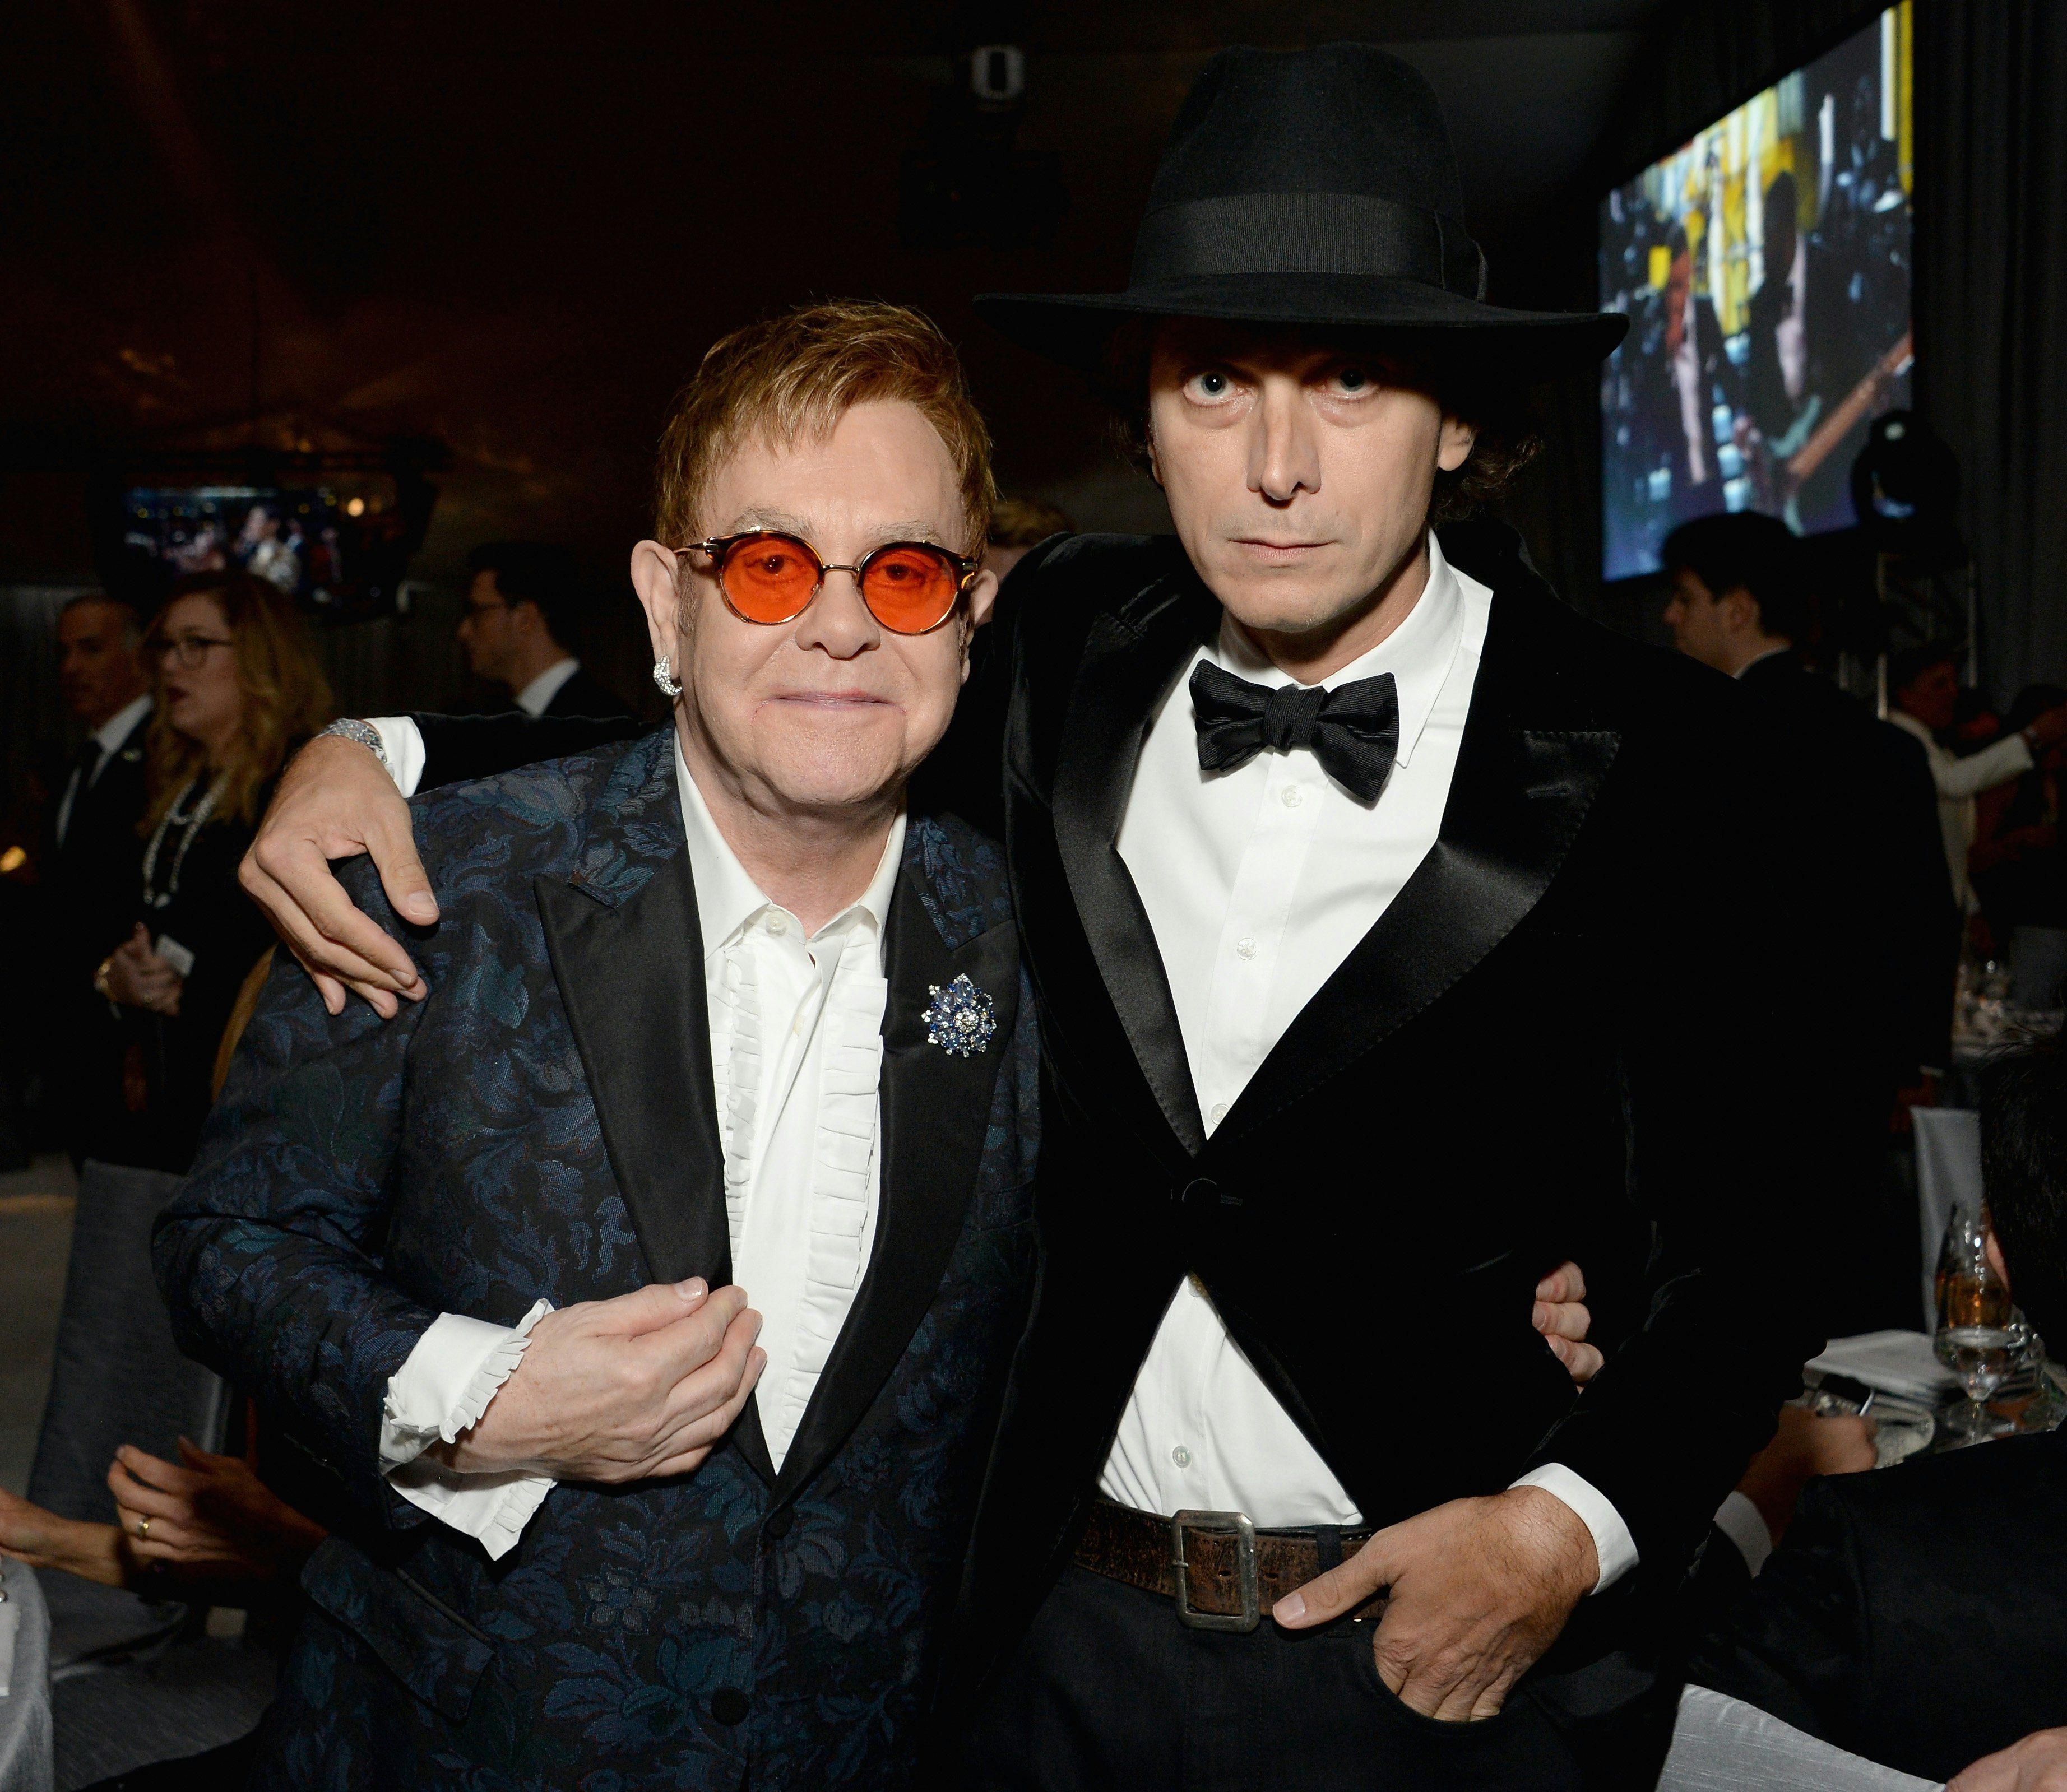 Sir Elton John, left, and designer Hedi Slimane attend a party at The City of West Hollywood Park. Photo: Ghetty Images